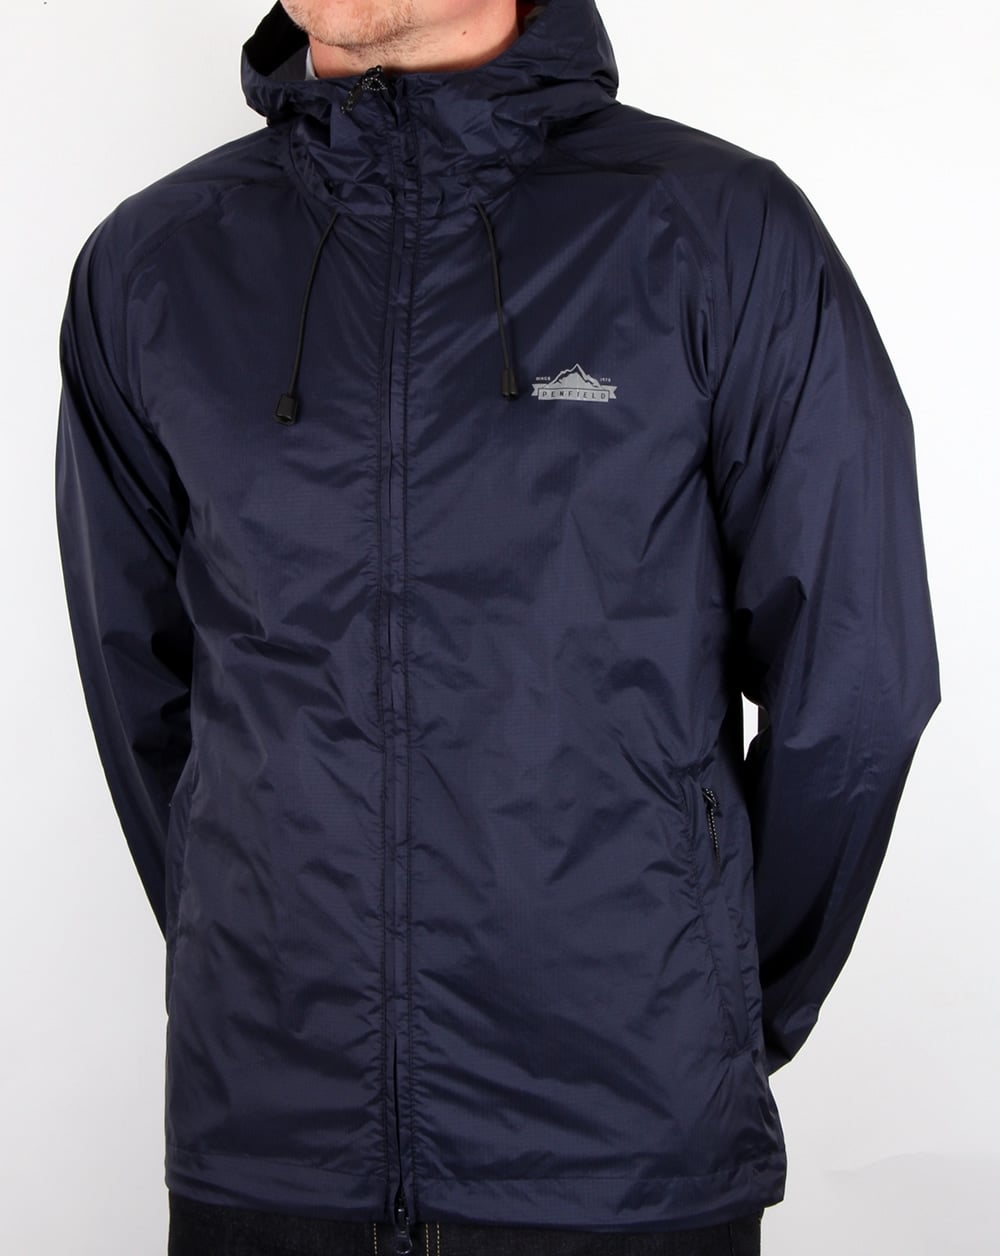 penfield jackets penfield travel shell jacket navy qbxoolg